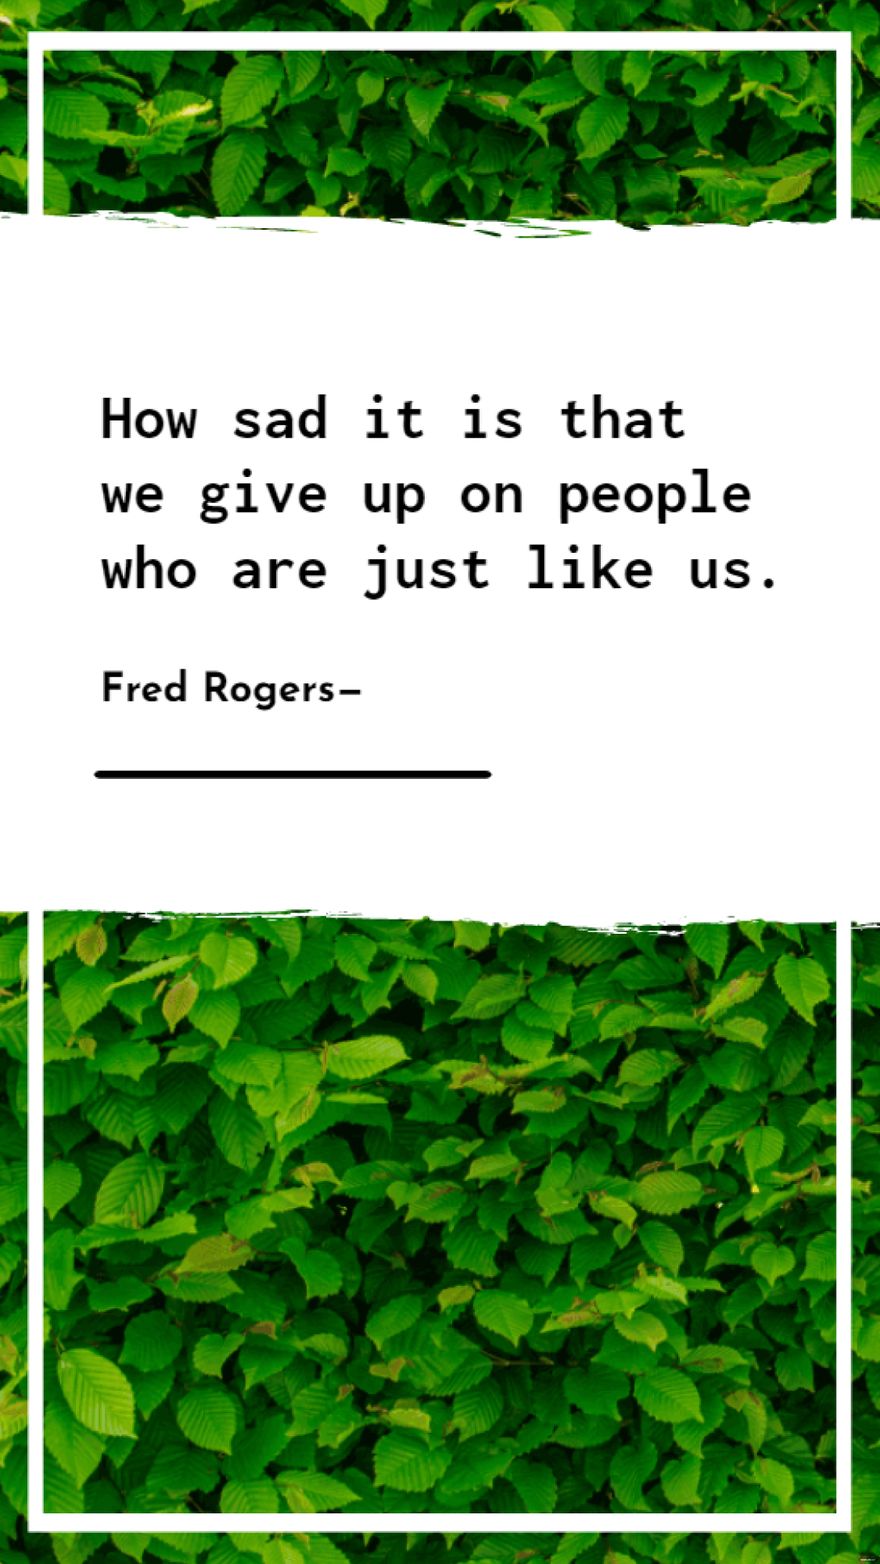 Fred Rogers - How sad it is that we give up on people who are just like us.